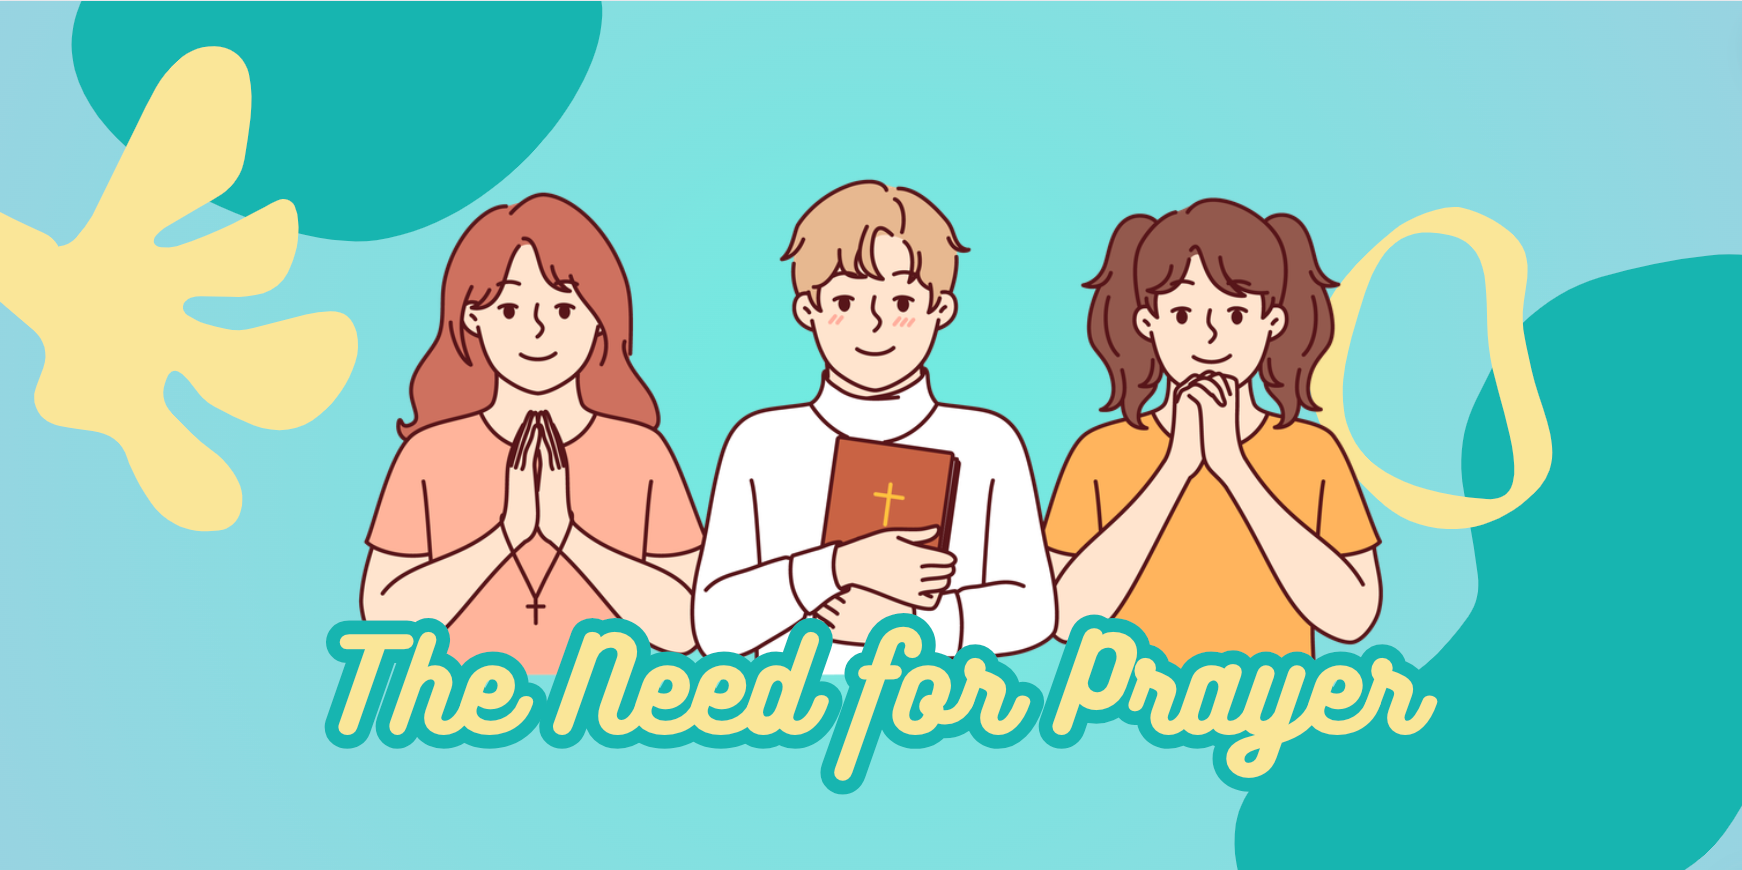 106: The Need for Prayer